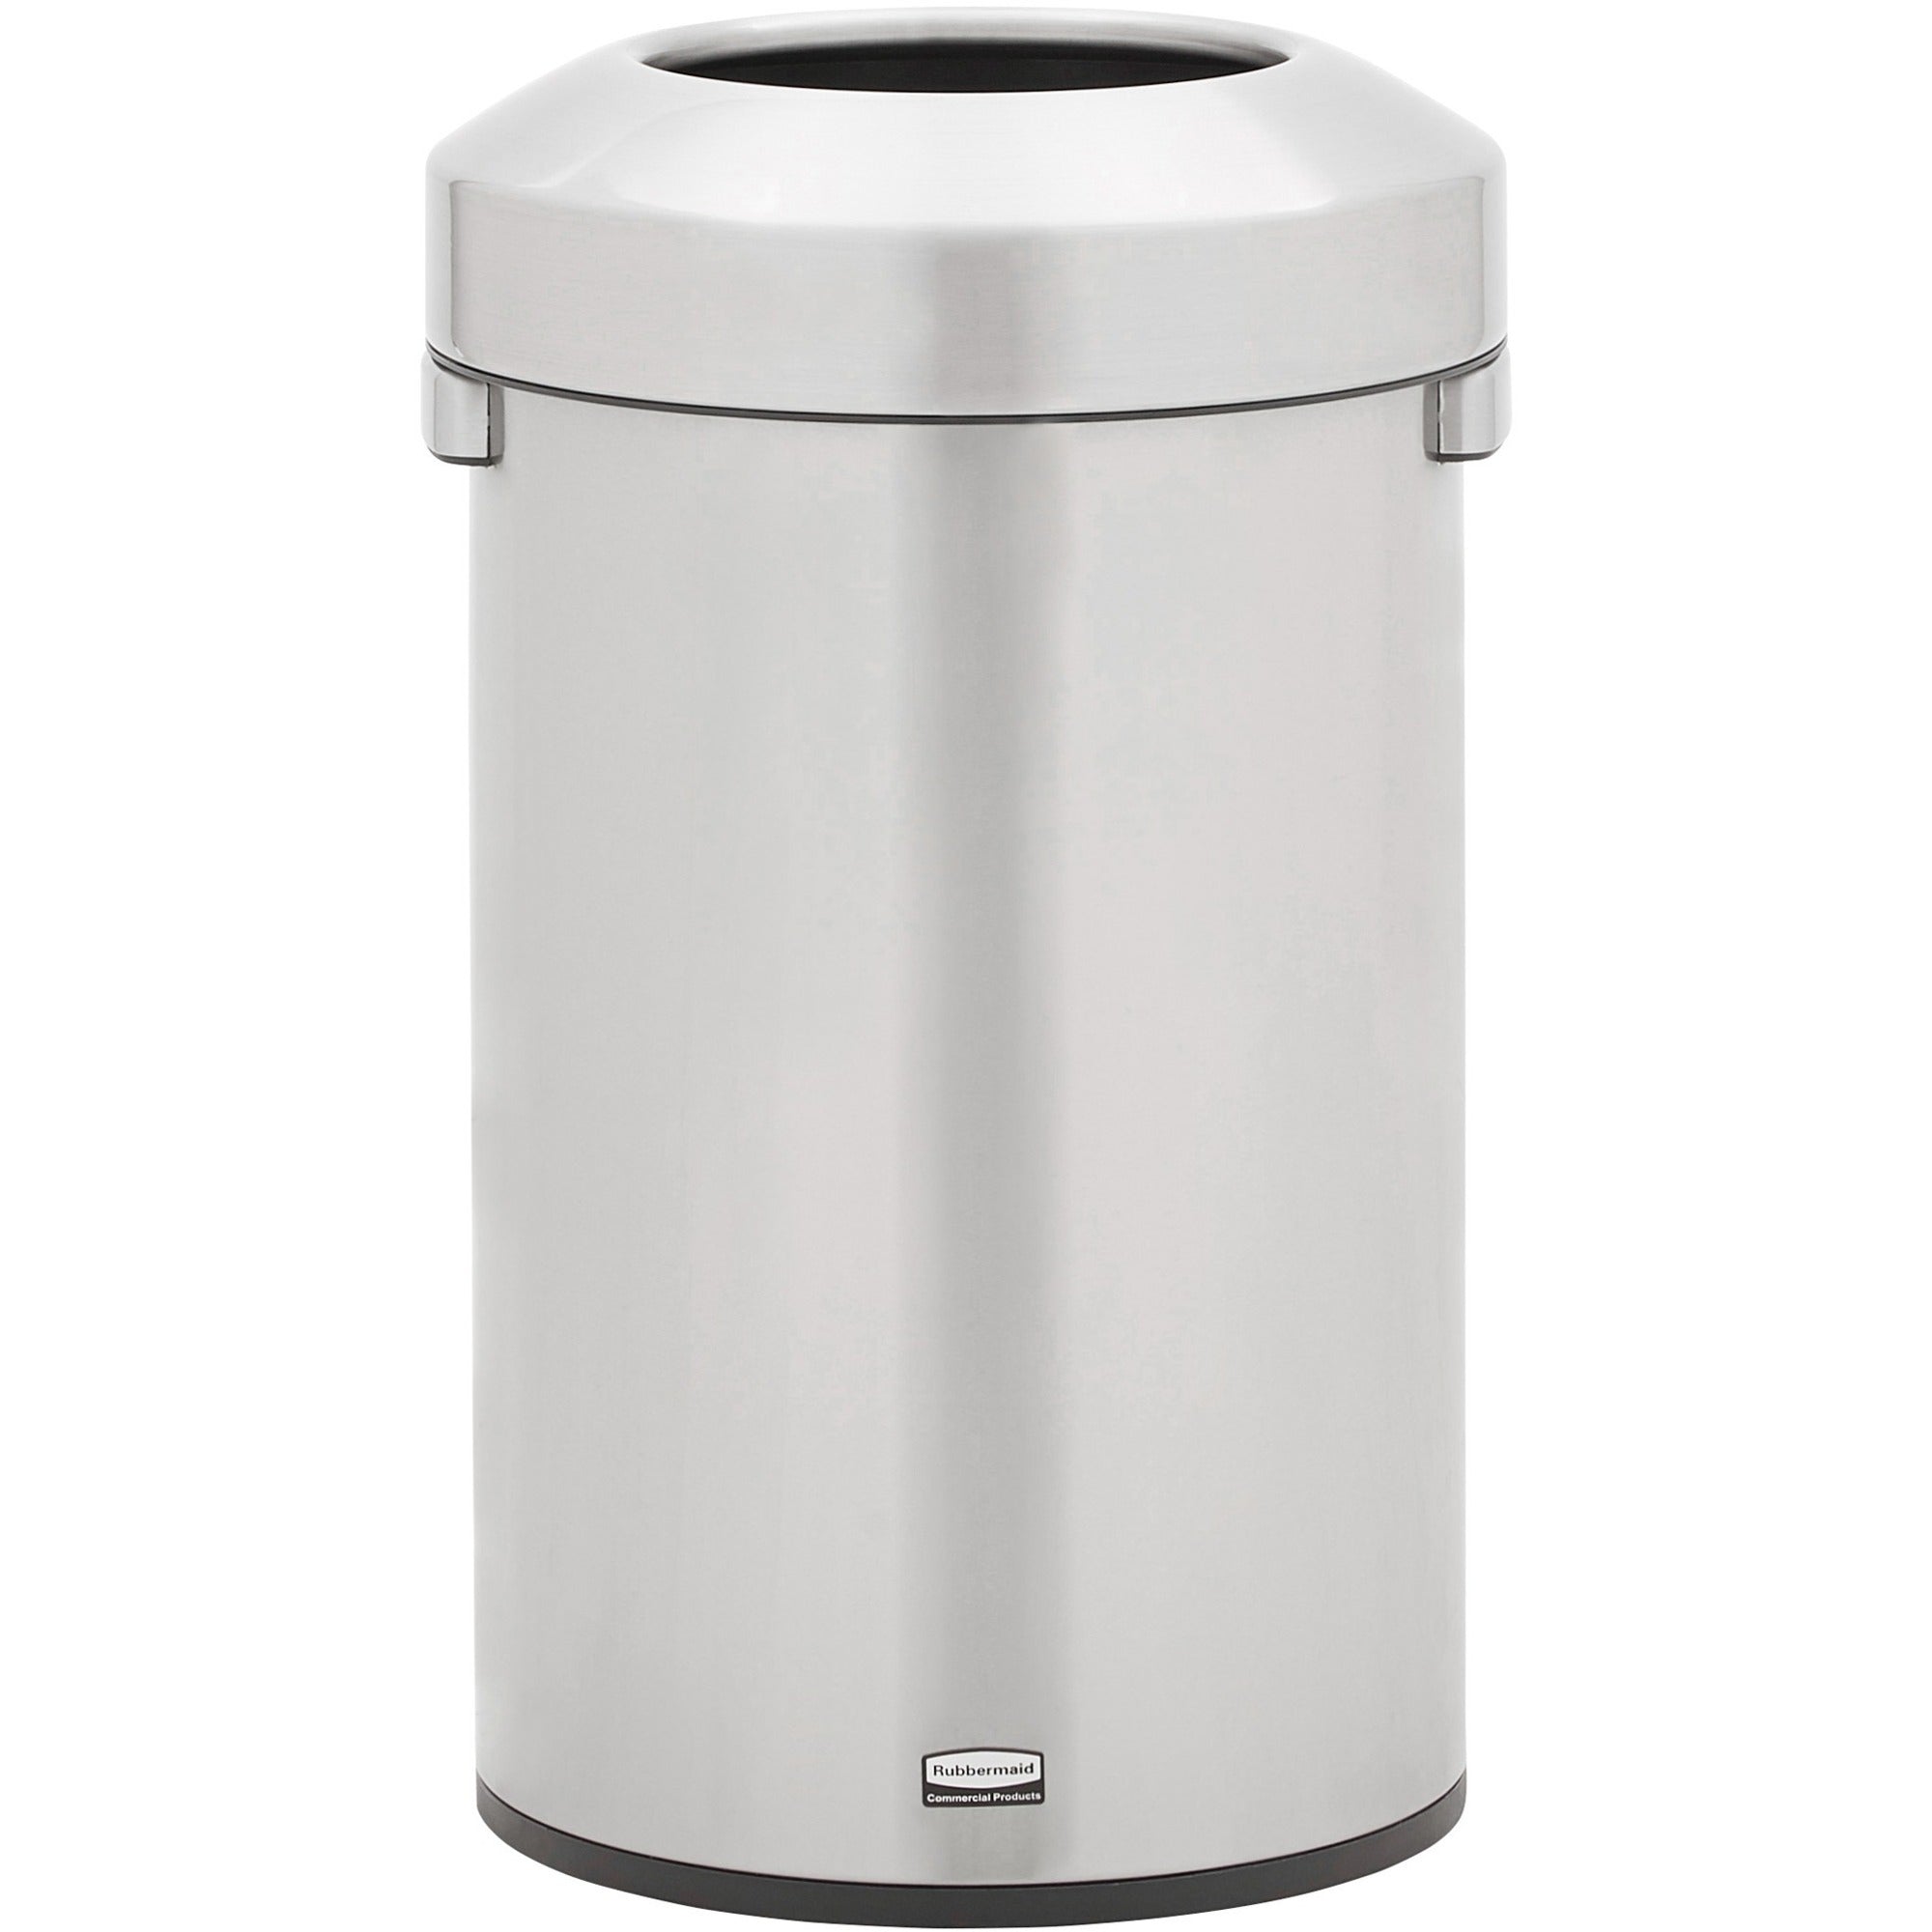 rubbermaid-commercial-refine-waste-container-16-gal-capacity-round-ergonomic-handle-non-skid-fingerprint-resistant-durable-263-height-x-159-width-metal-stainless-steel-1-each_rcp2147583 - 1